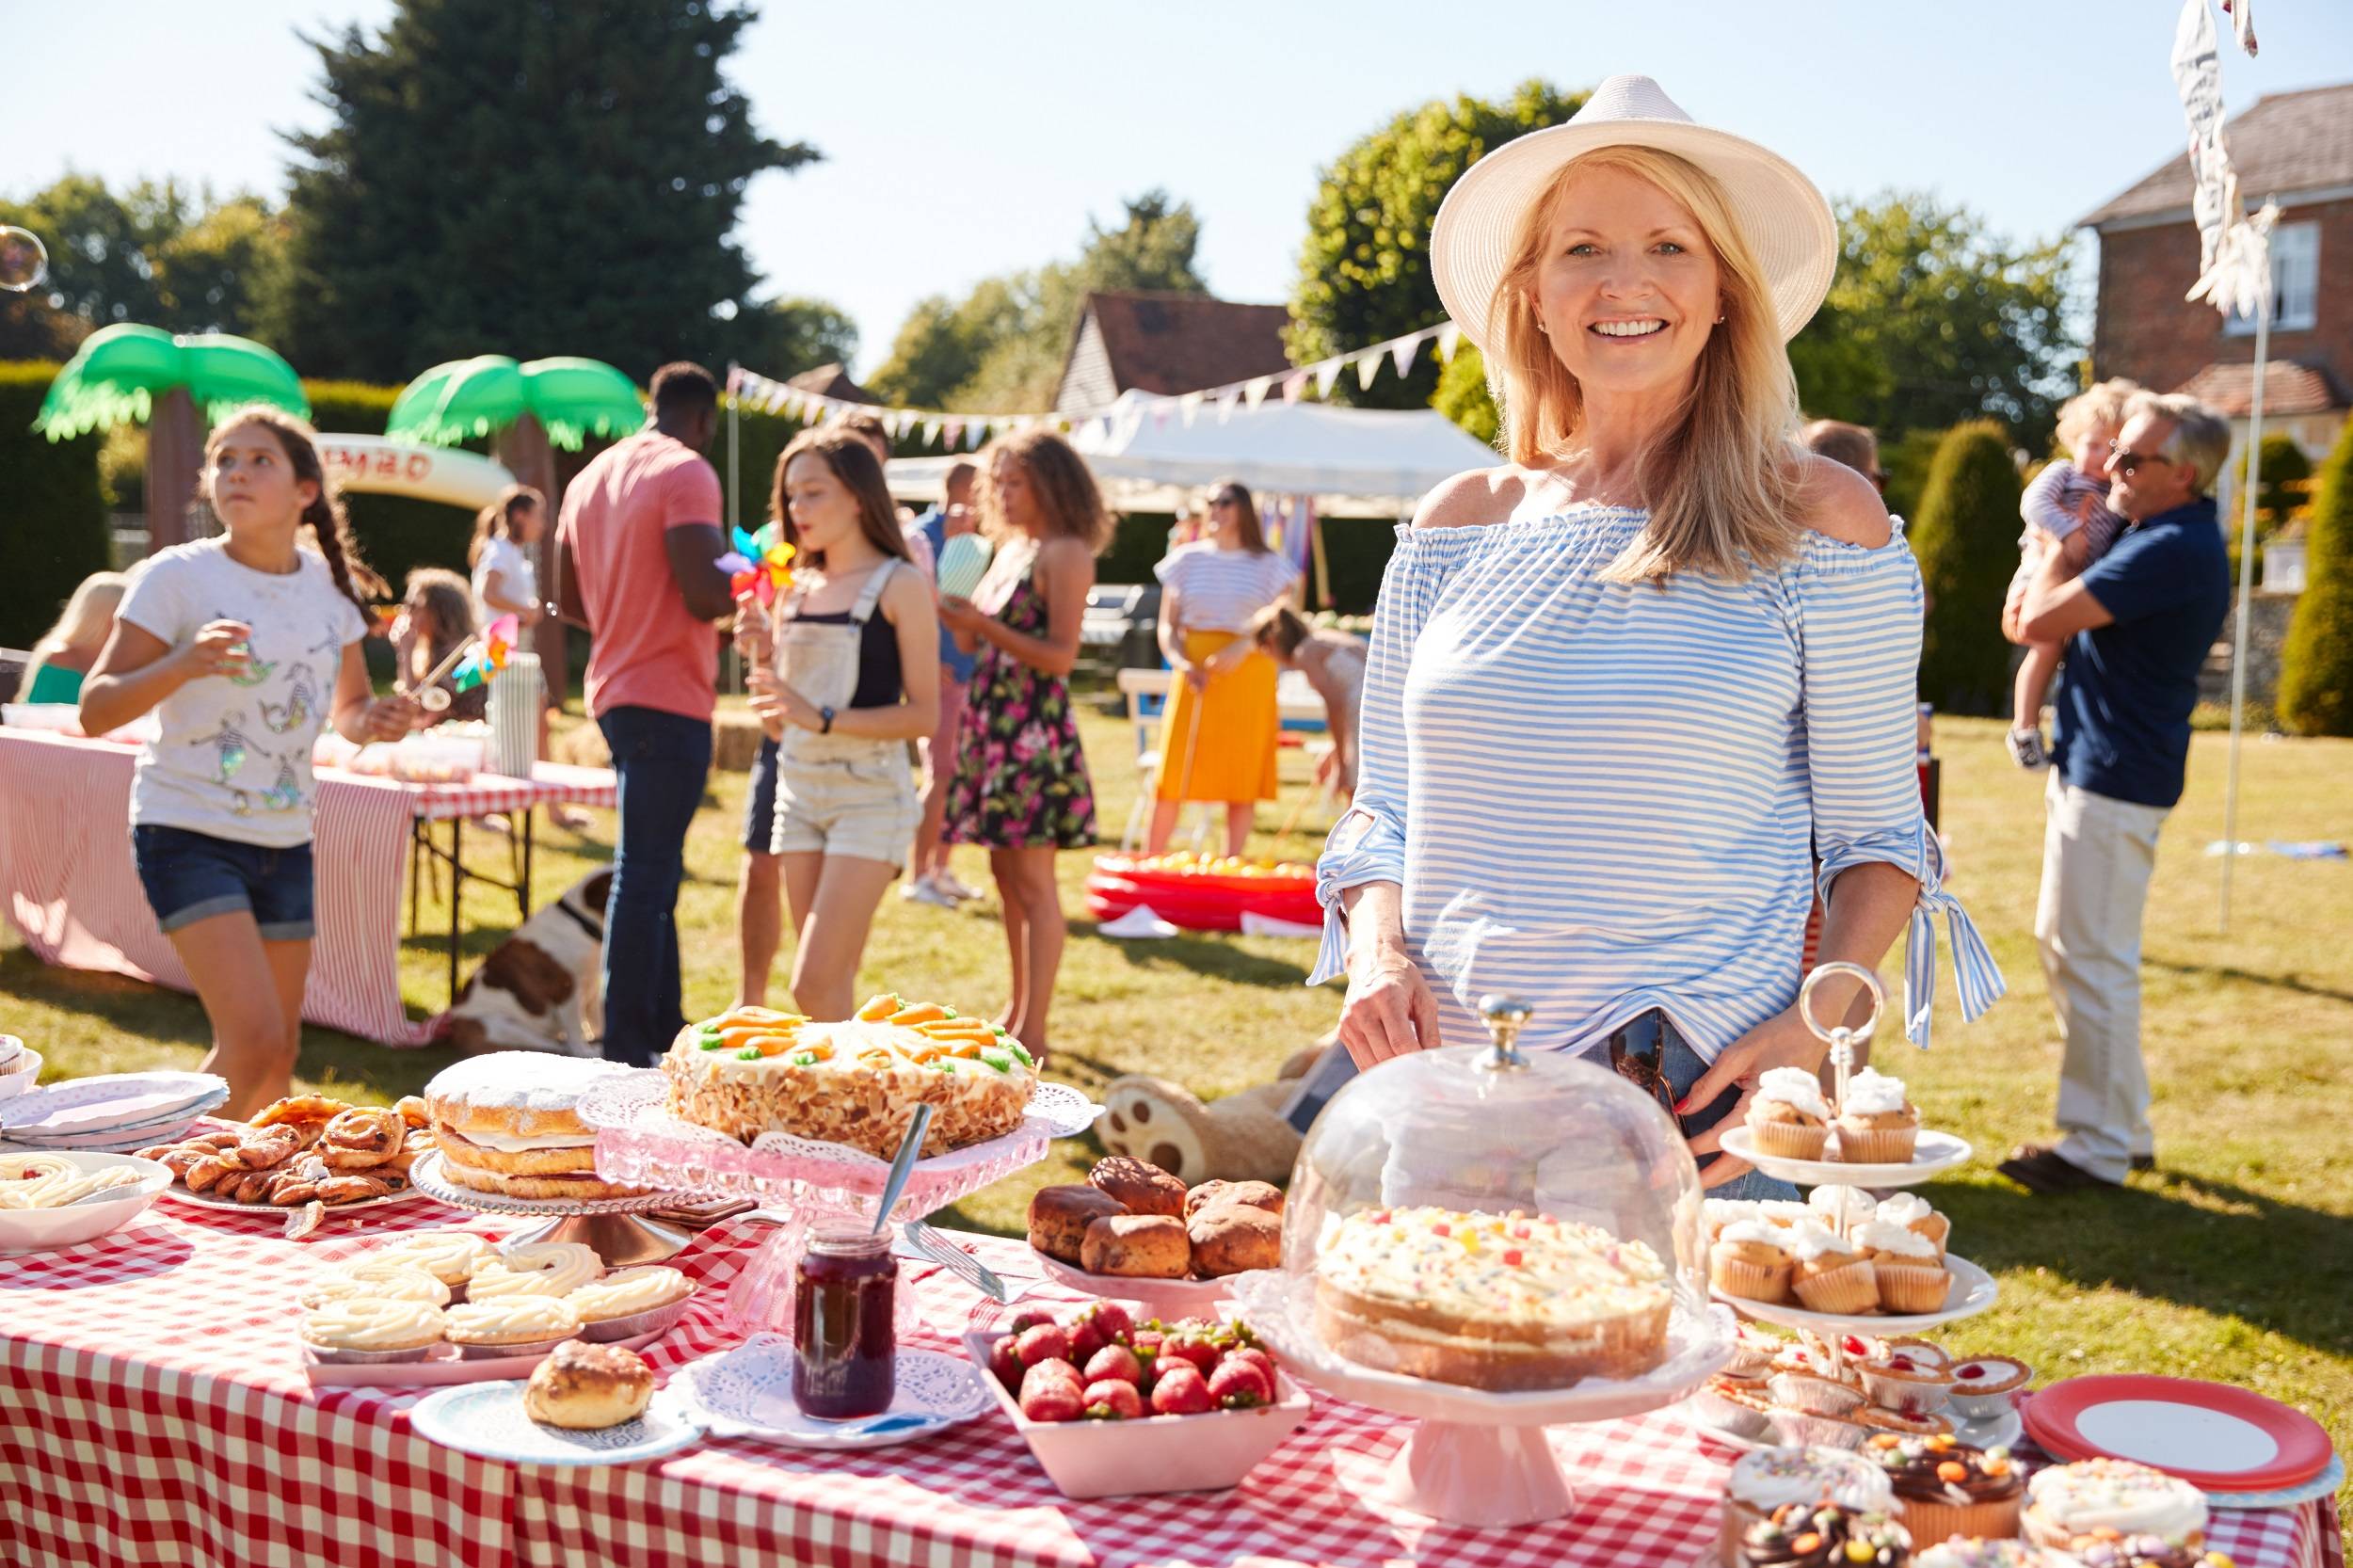 Older woman fundraising at a bake sale for charity